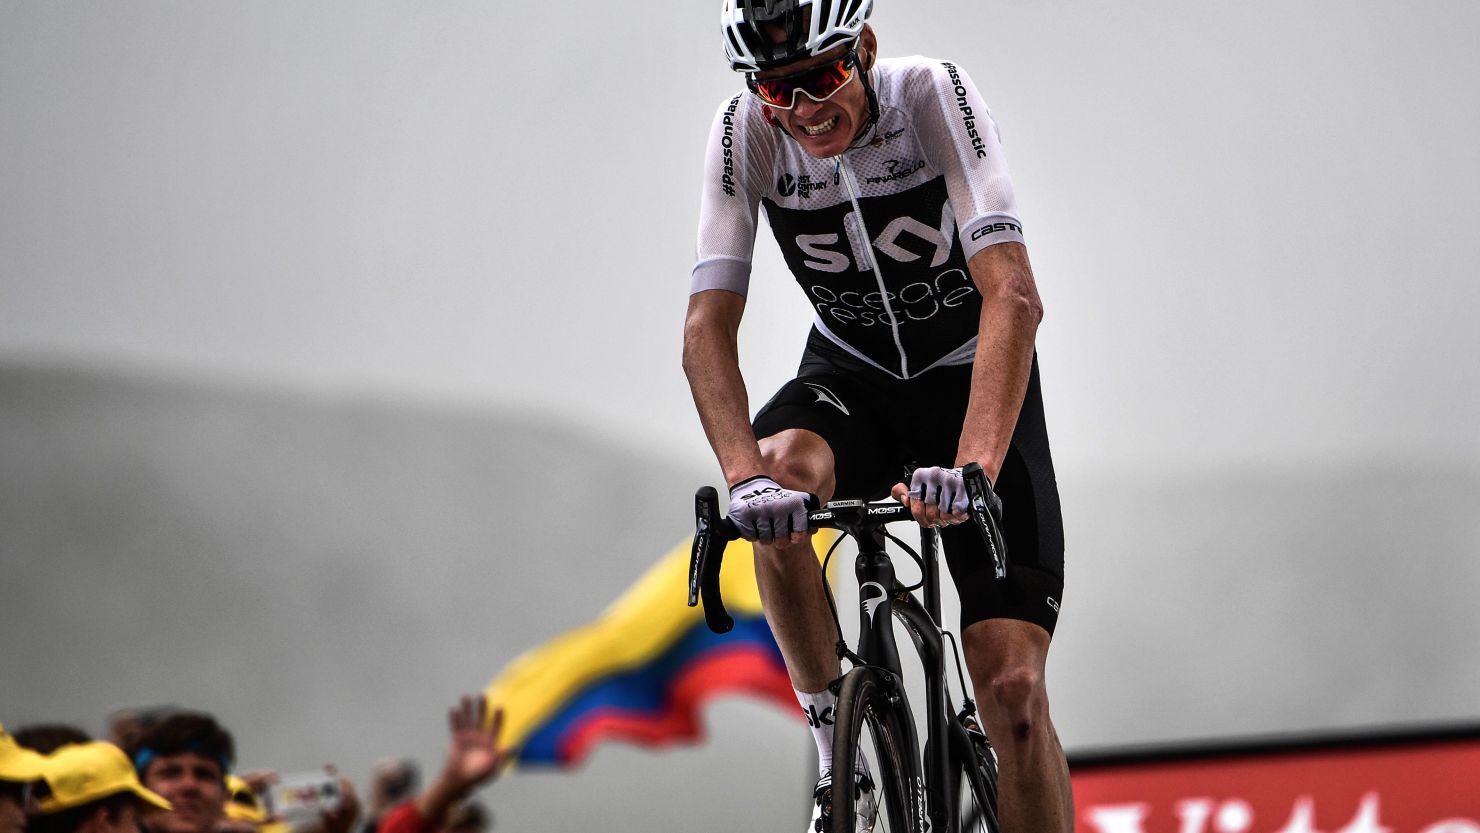 Froome is aiming for a record-equaling fourth successive Tour win.